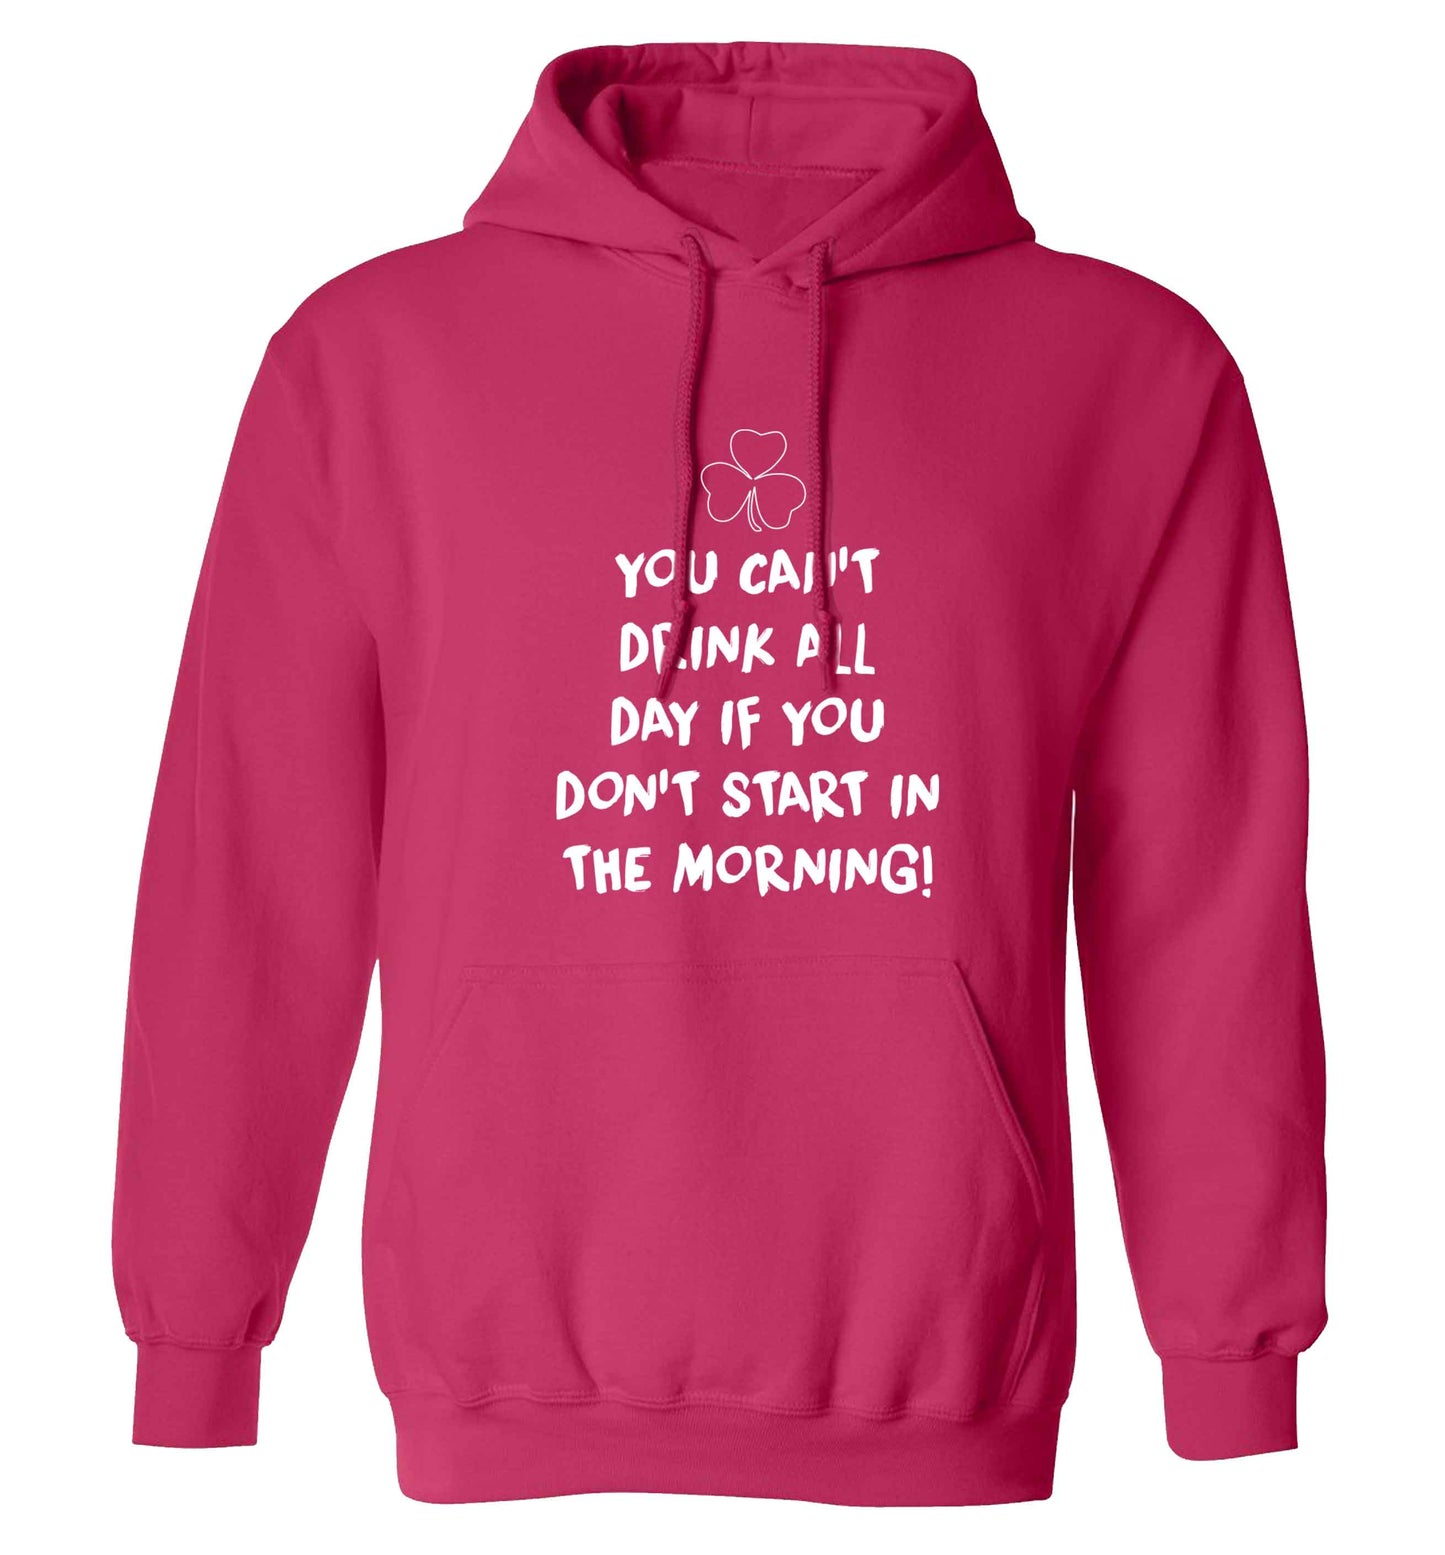 You can't drink all day if you don't start in the morning adults unisex pink hoodie 2XL